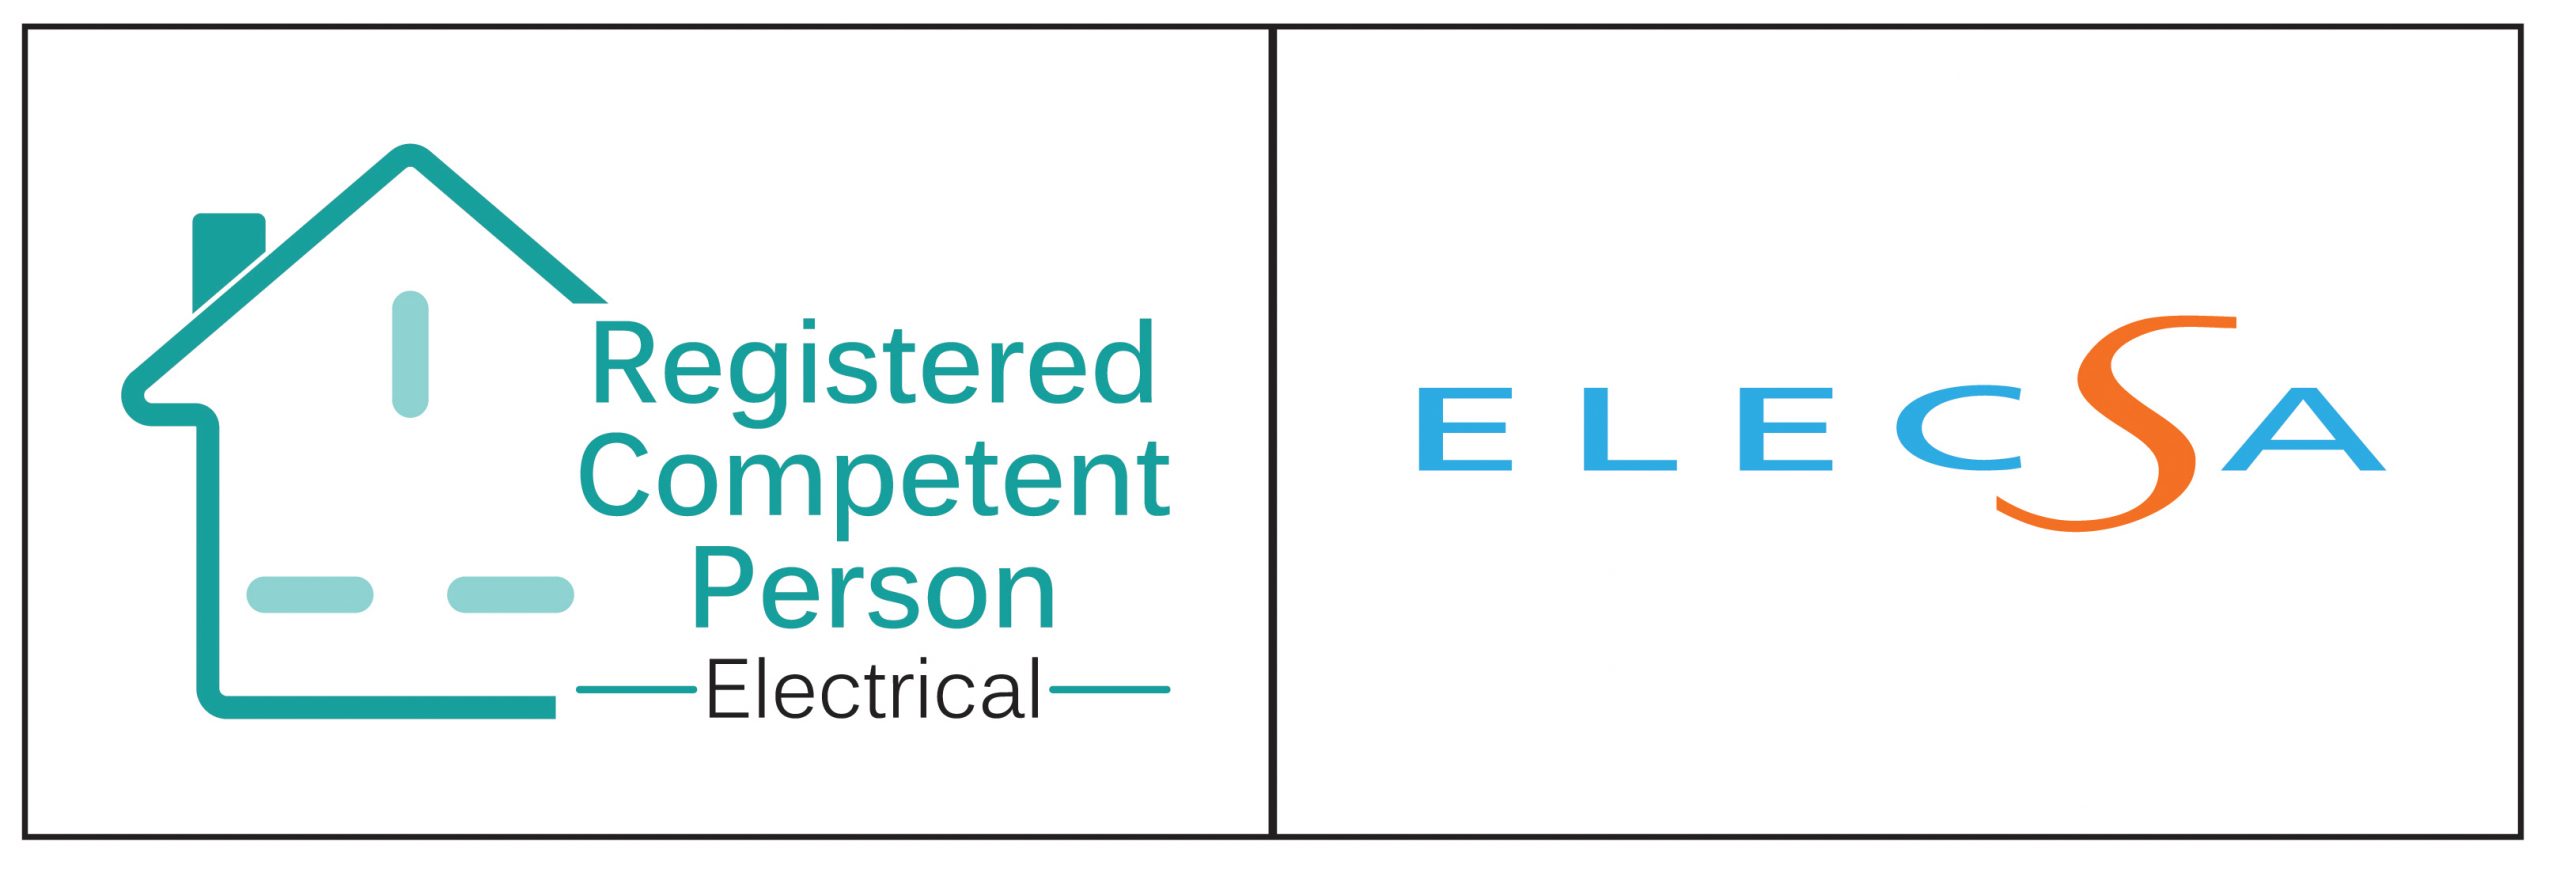 Registered Competent Person Electrical - van sticker_blank_17061